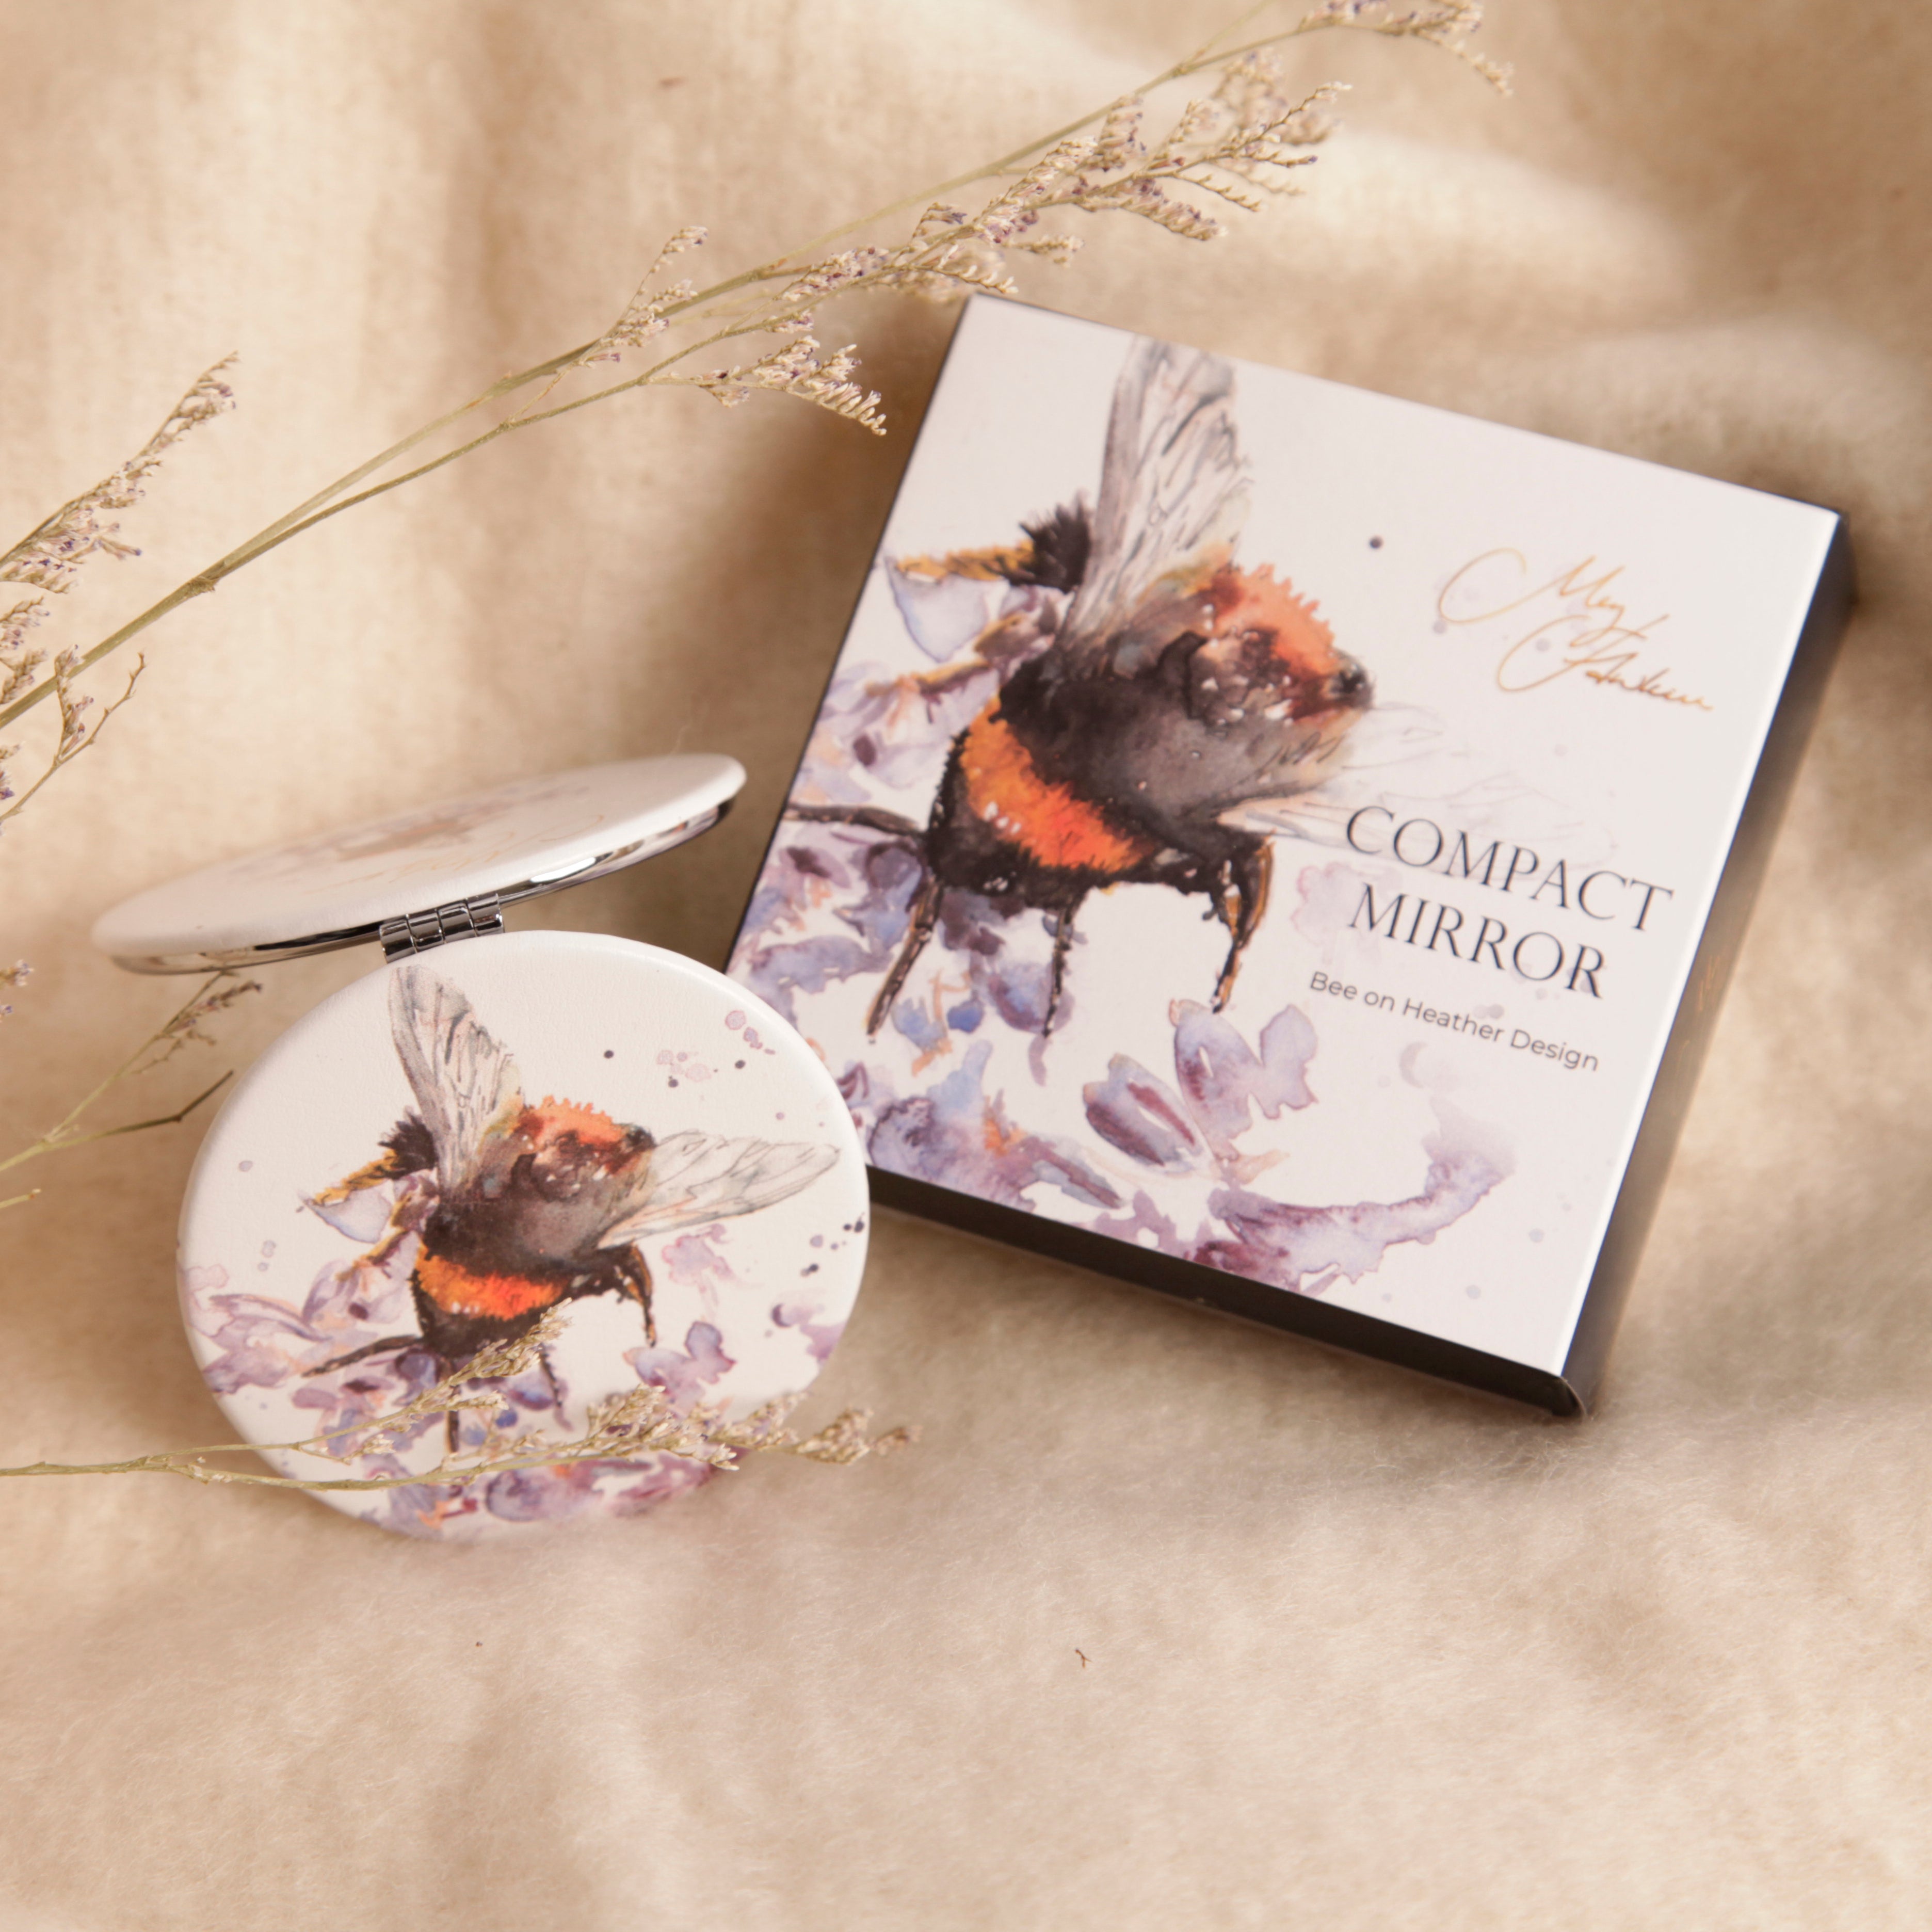 Bee on Heather Design Watercolour Compact Mirror